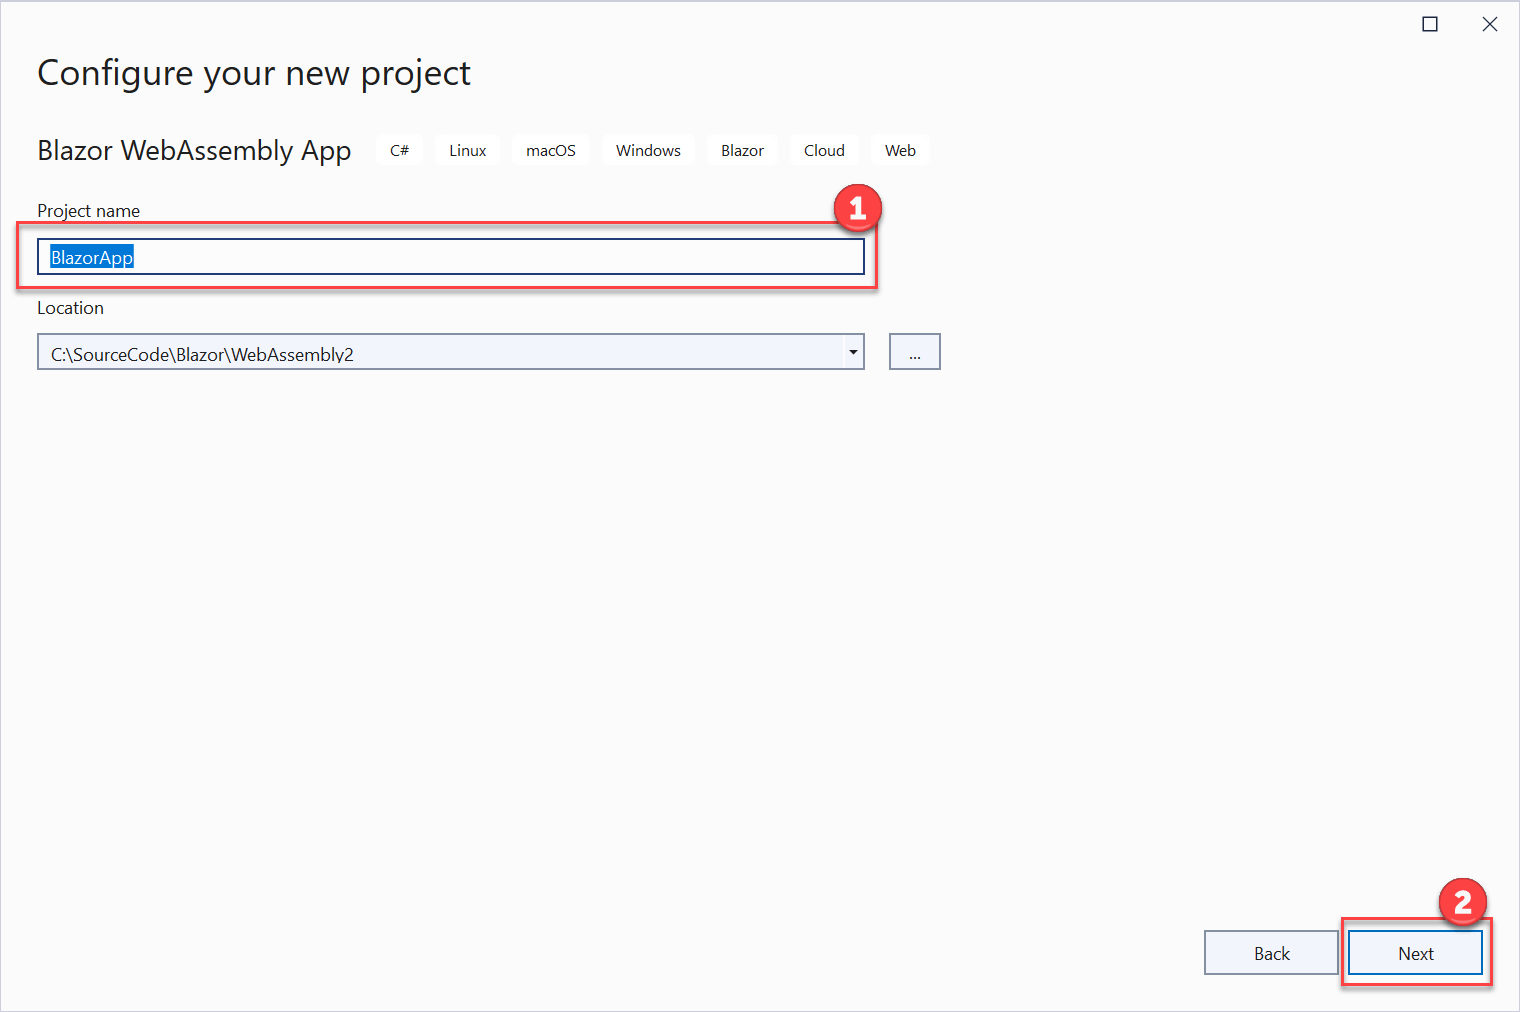 The Configure your new project dialog displays with BlazorApp entered for the project name. The Next button is highlighted.